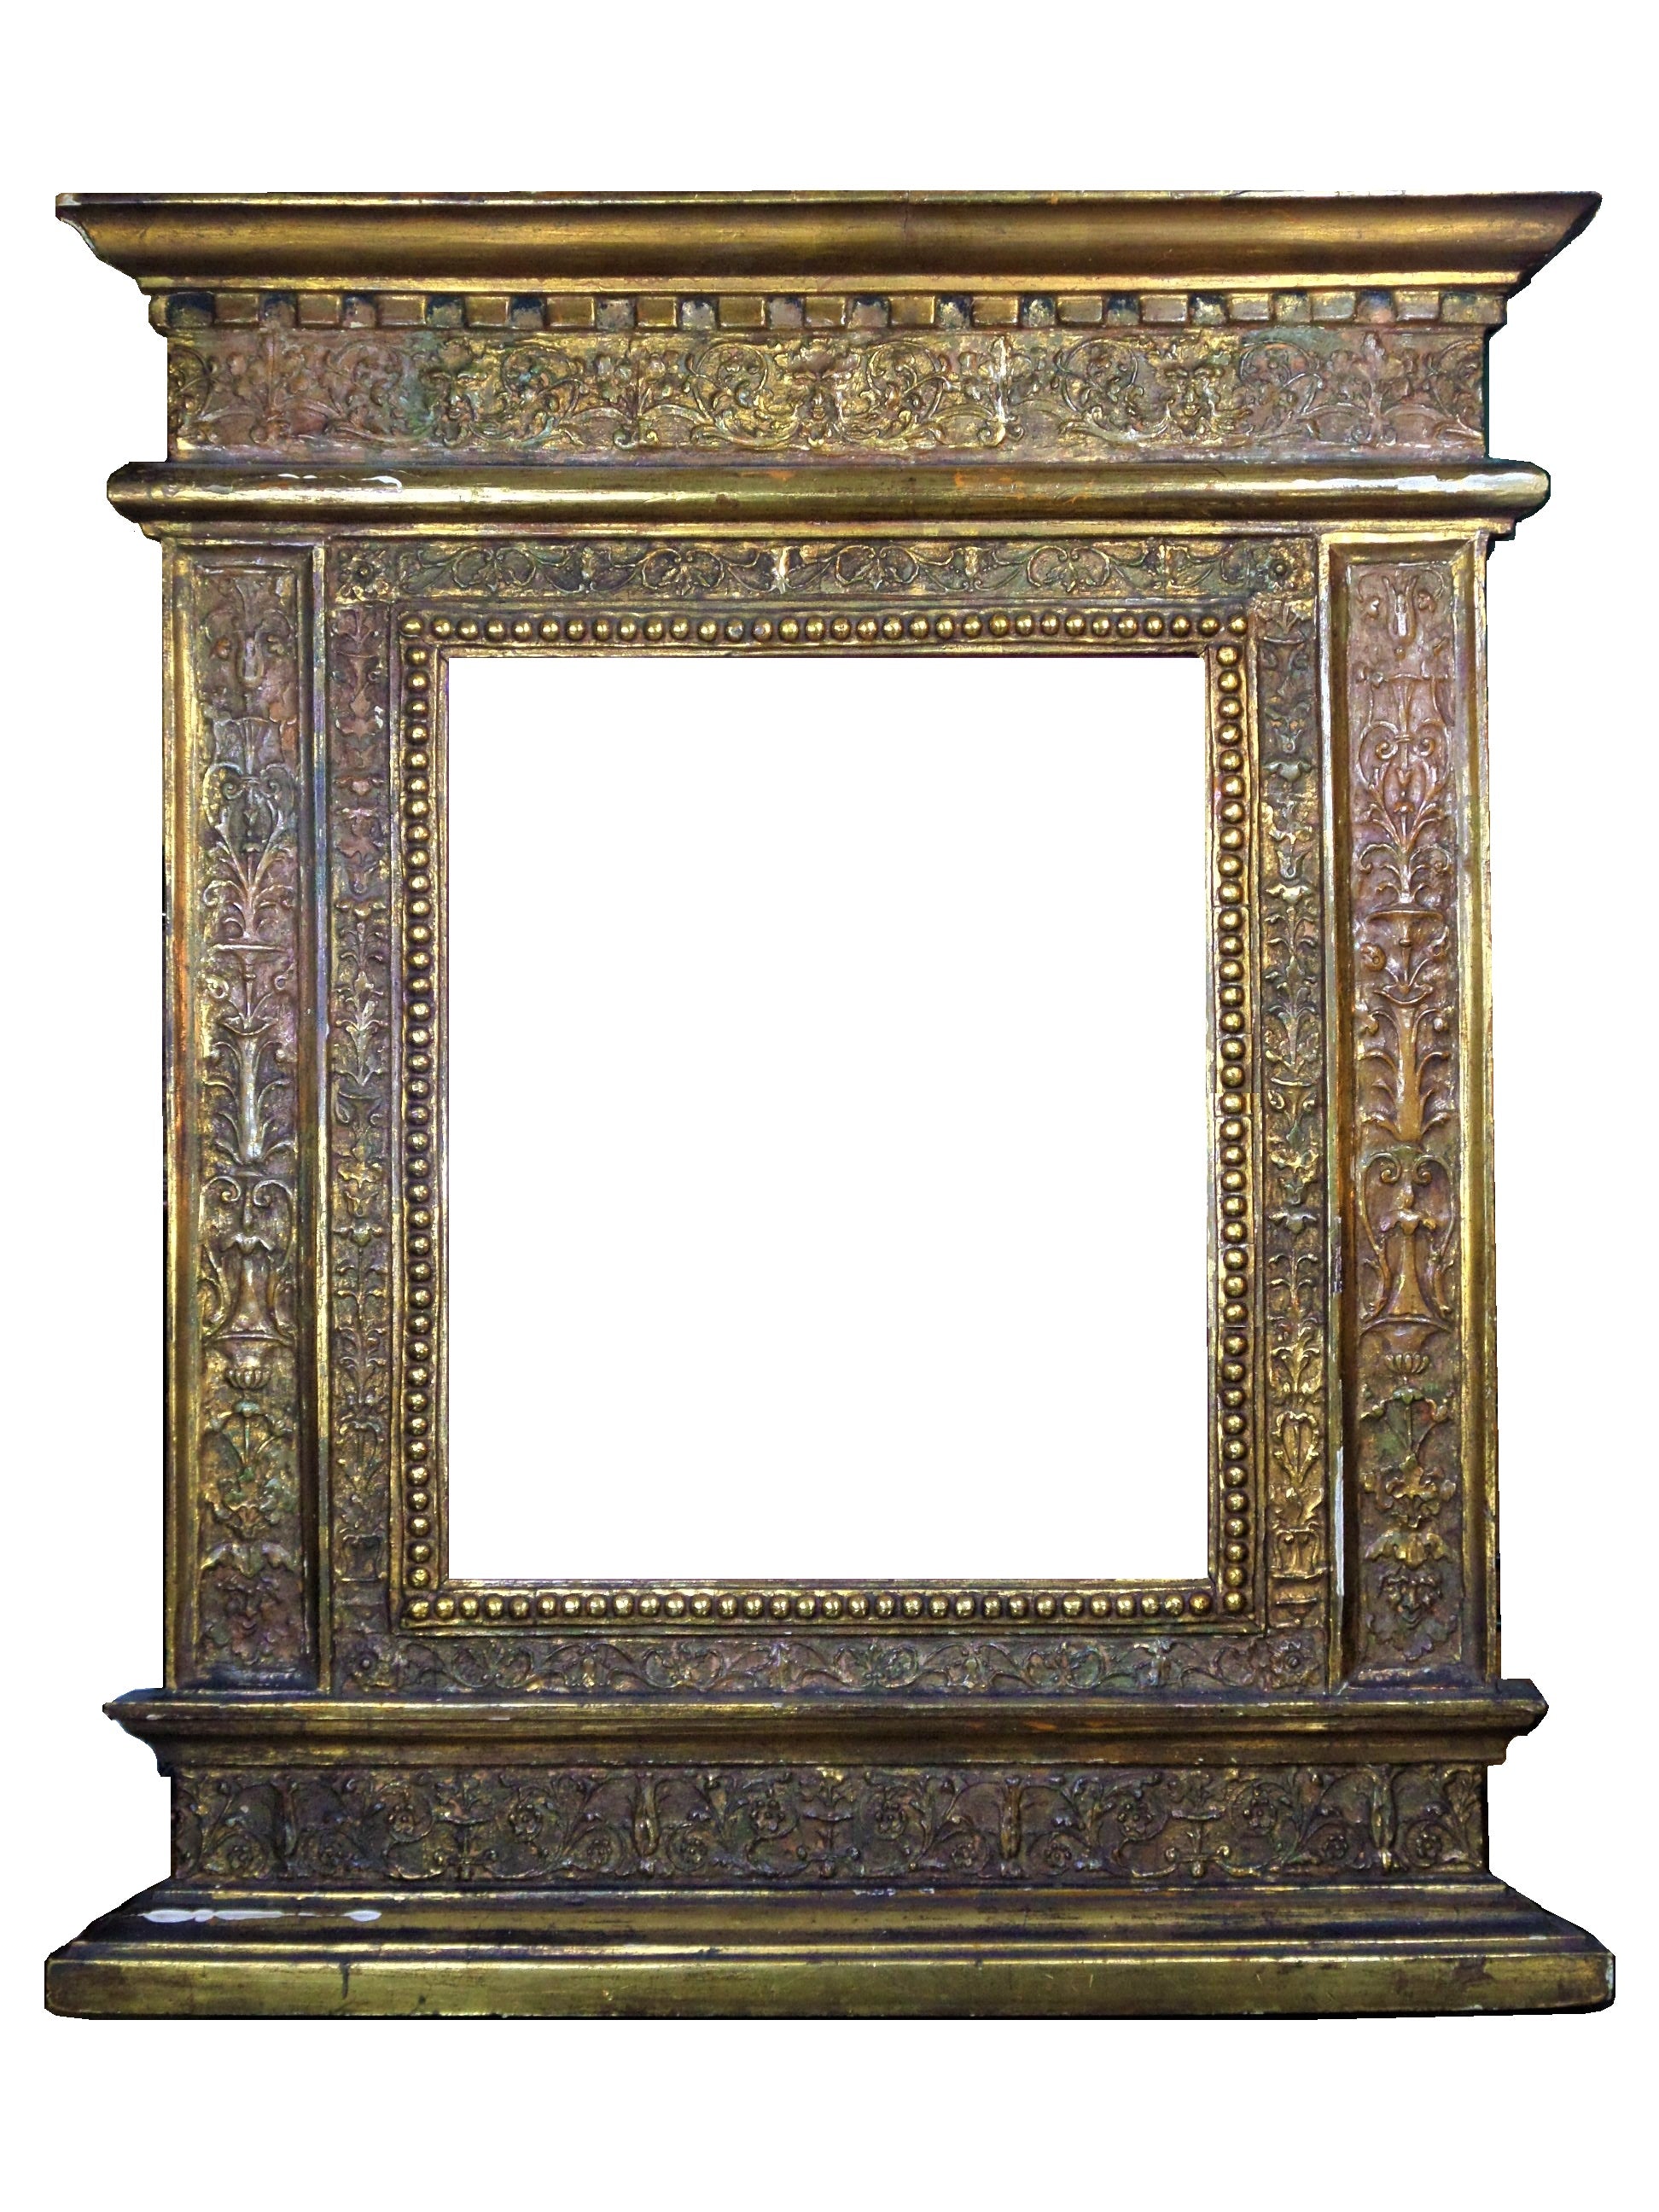 ANTIQUE 18TH CENTURY ITALIAN SCHOOL TABERNACLE PICTURE FRAME